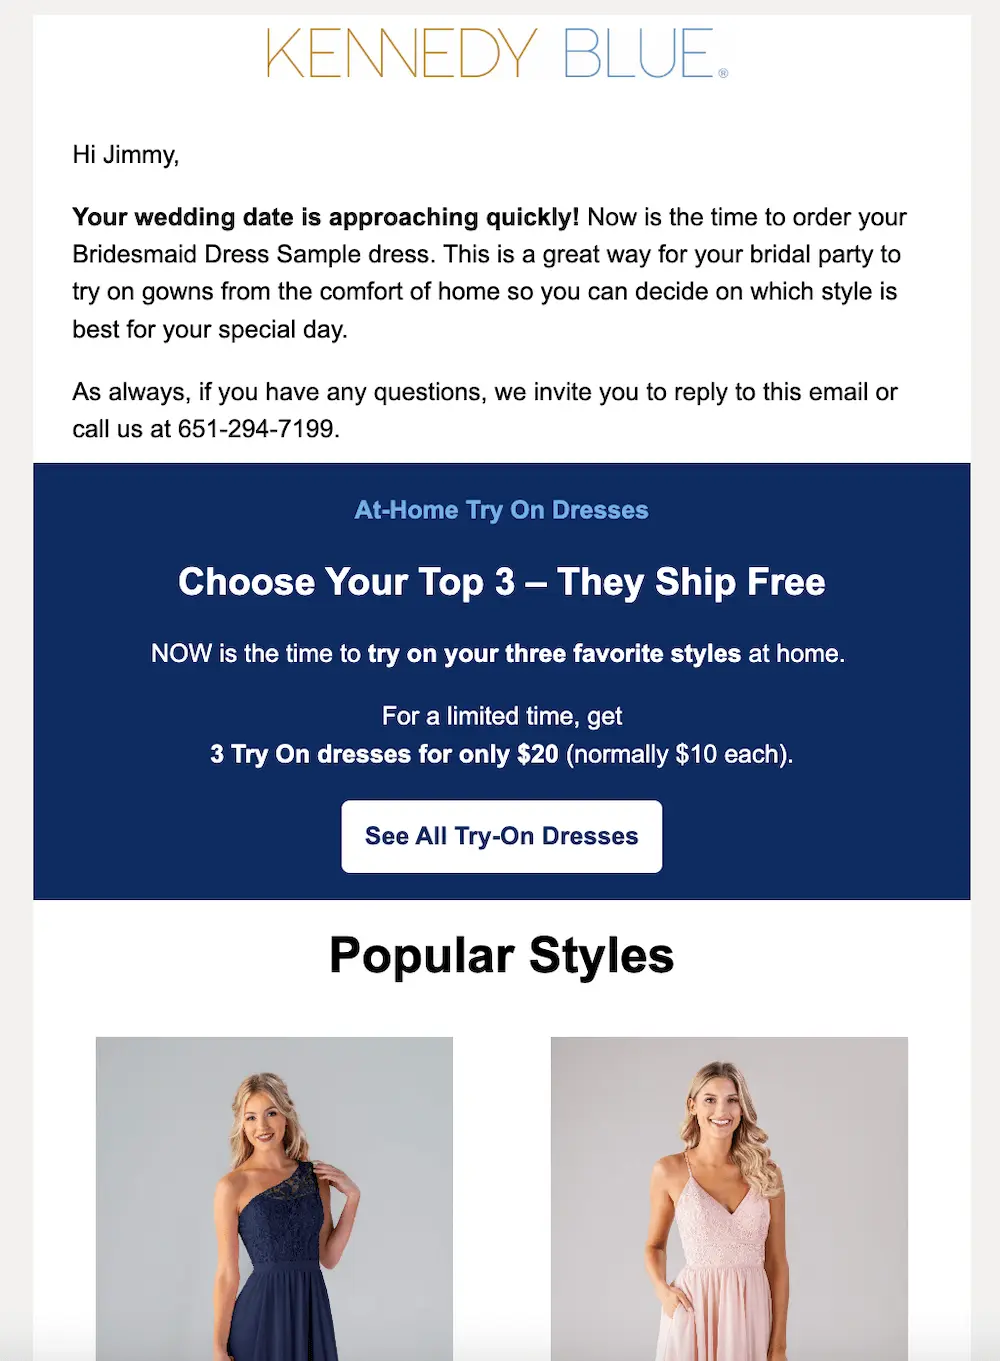 Image shows a marketing email from Kennedy Blue